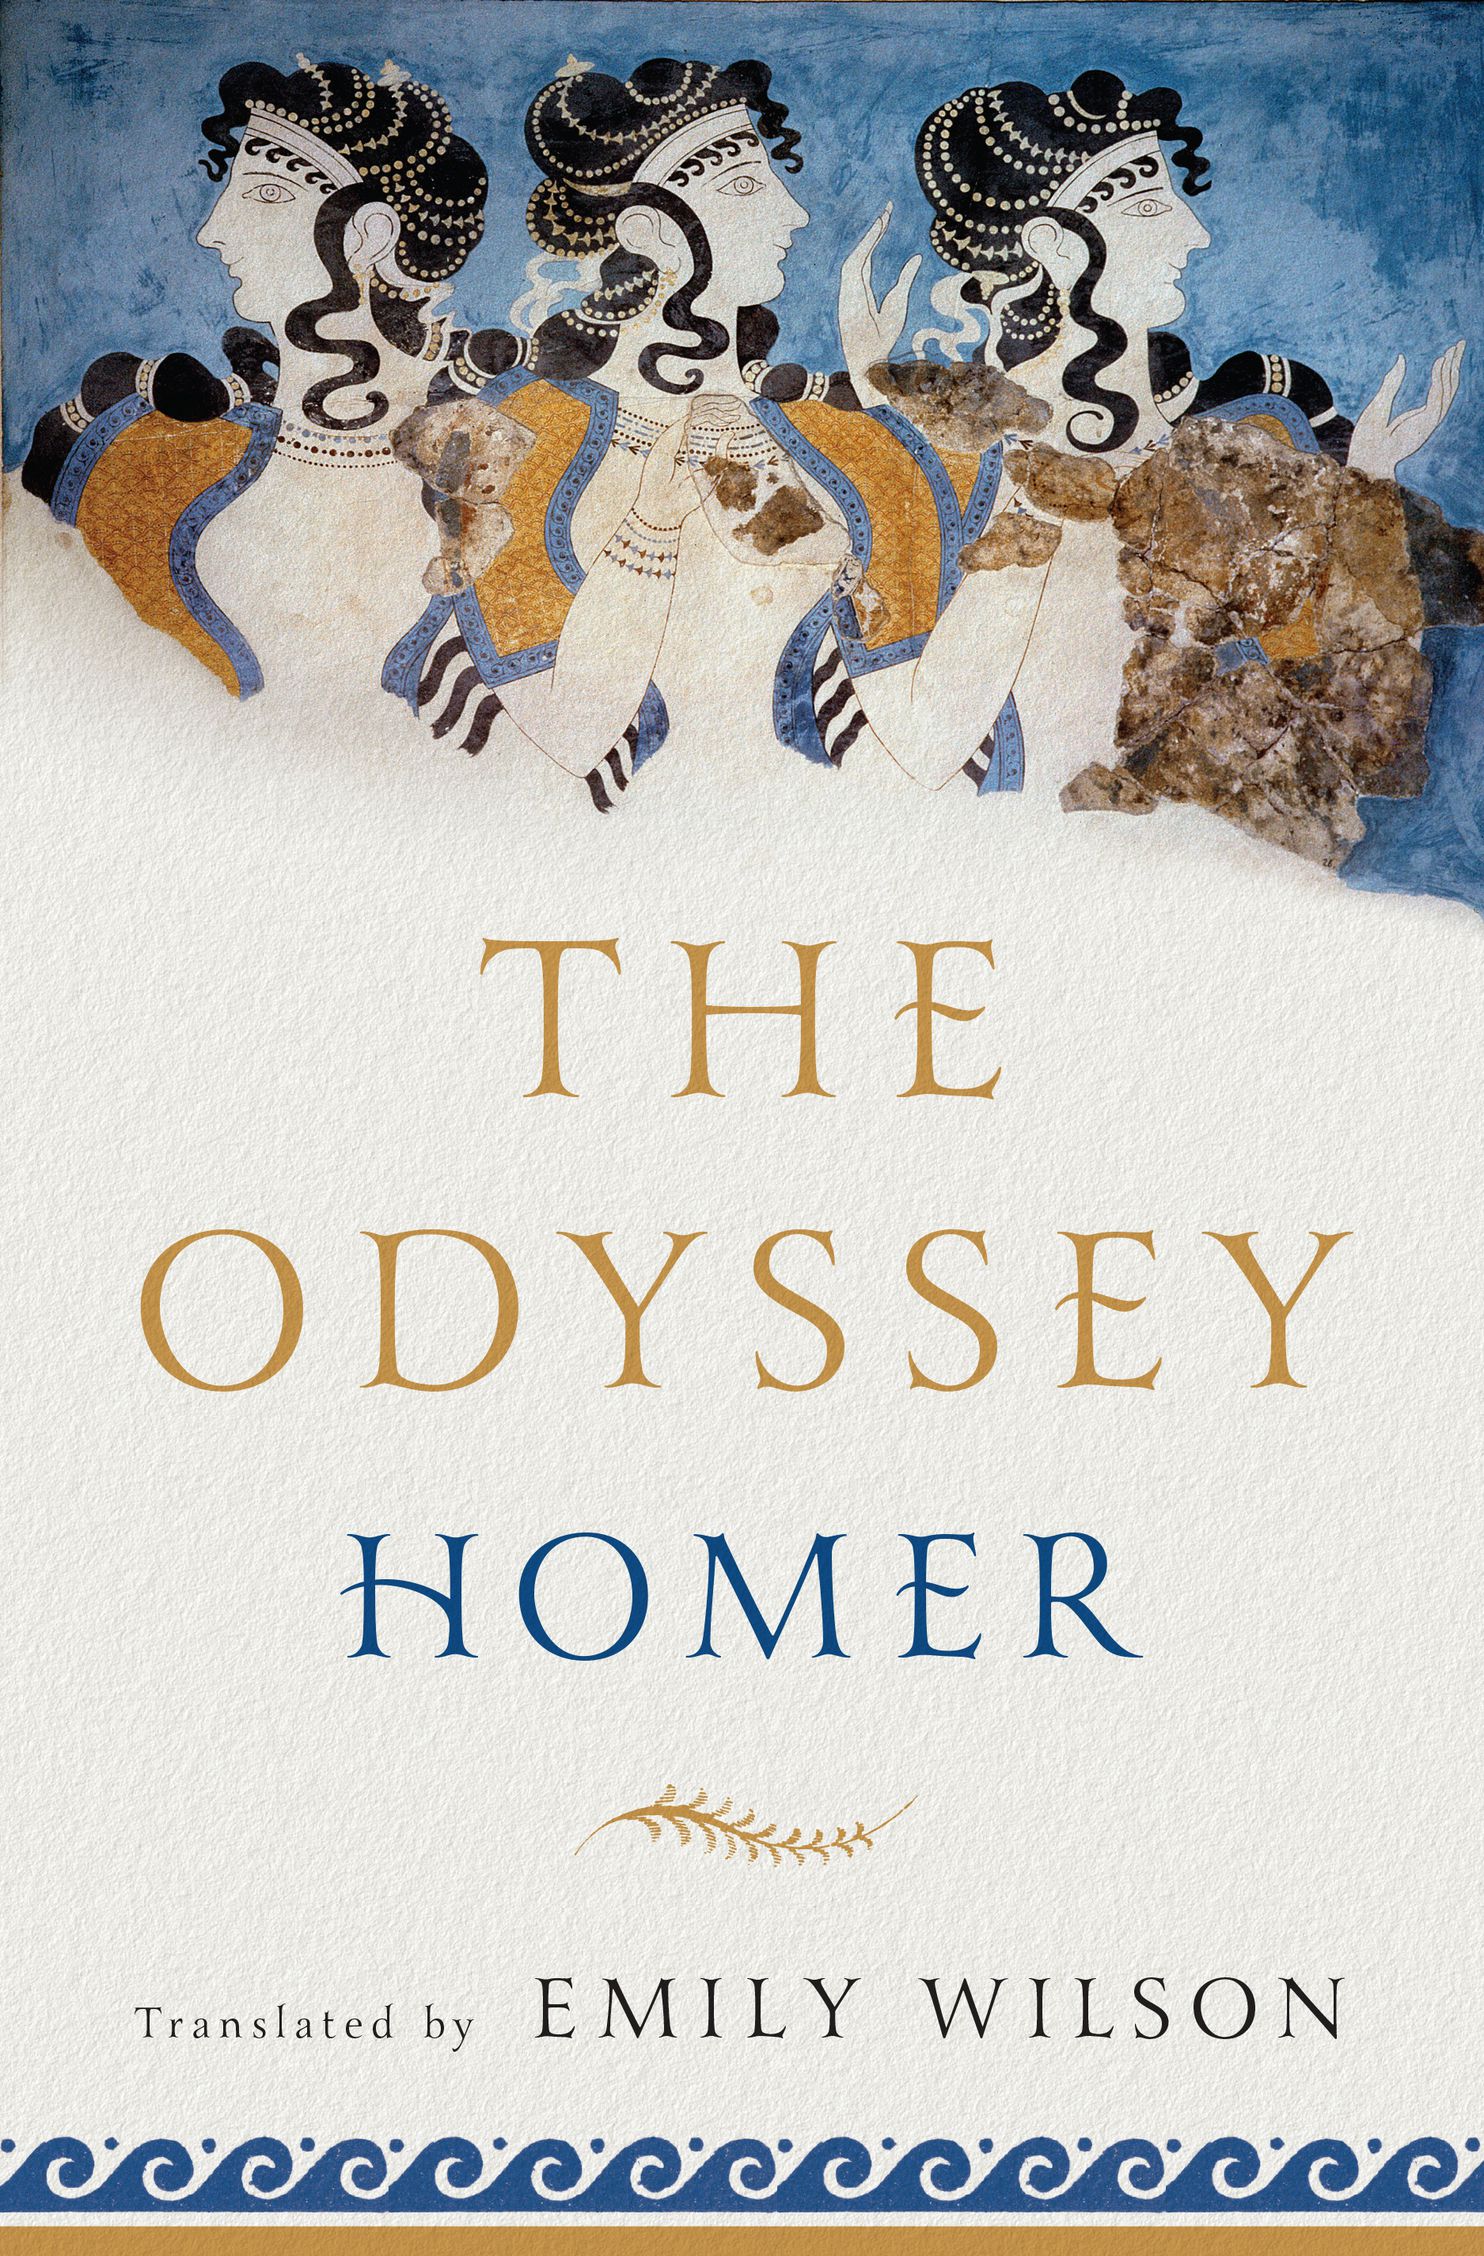 Image for "The Odyssey"